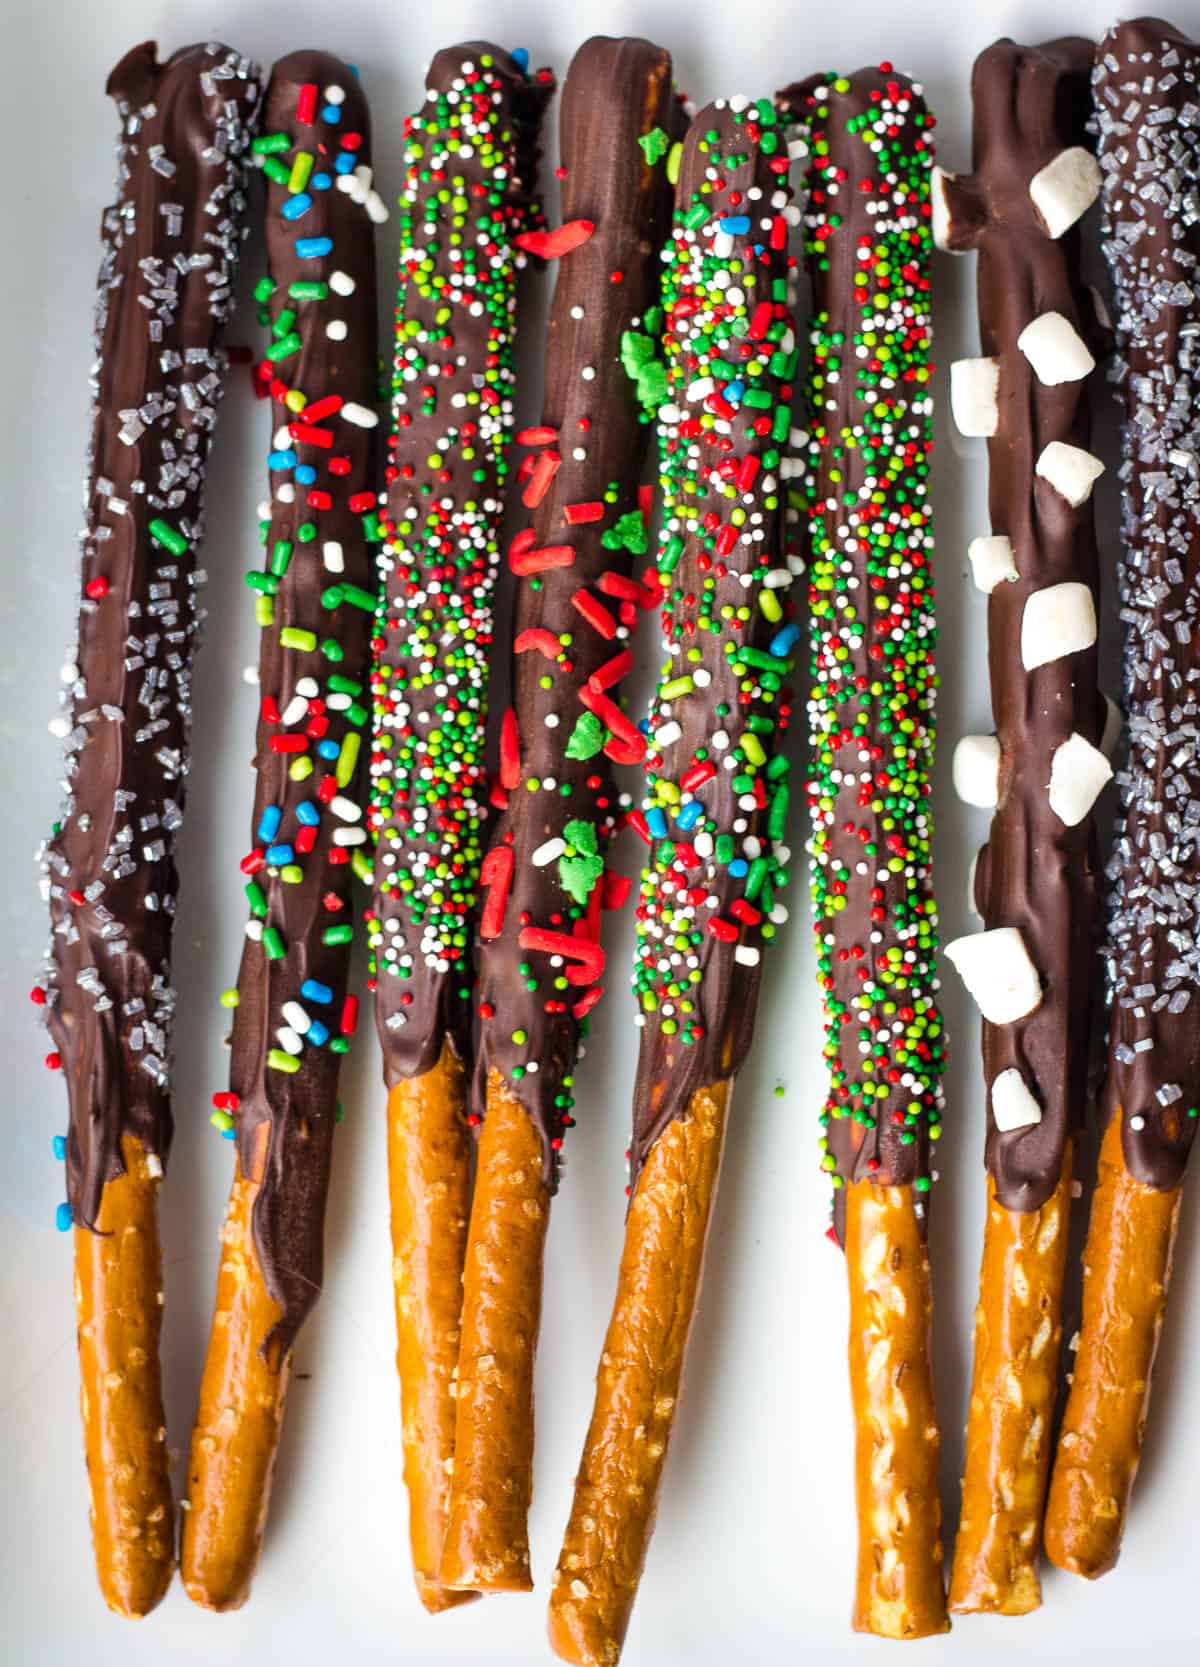 chocolate covered pretzel rods with holiday sprinkles